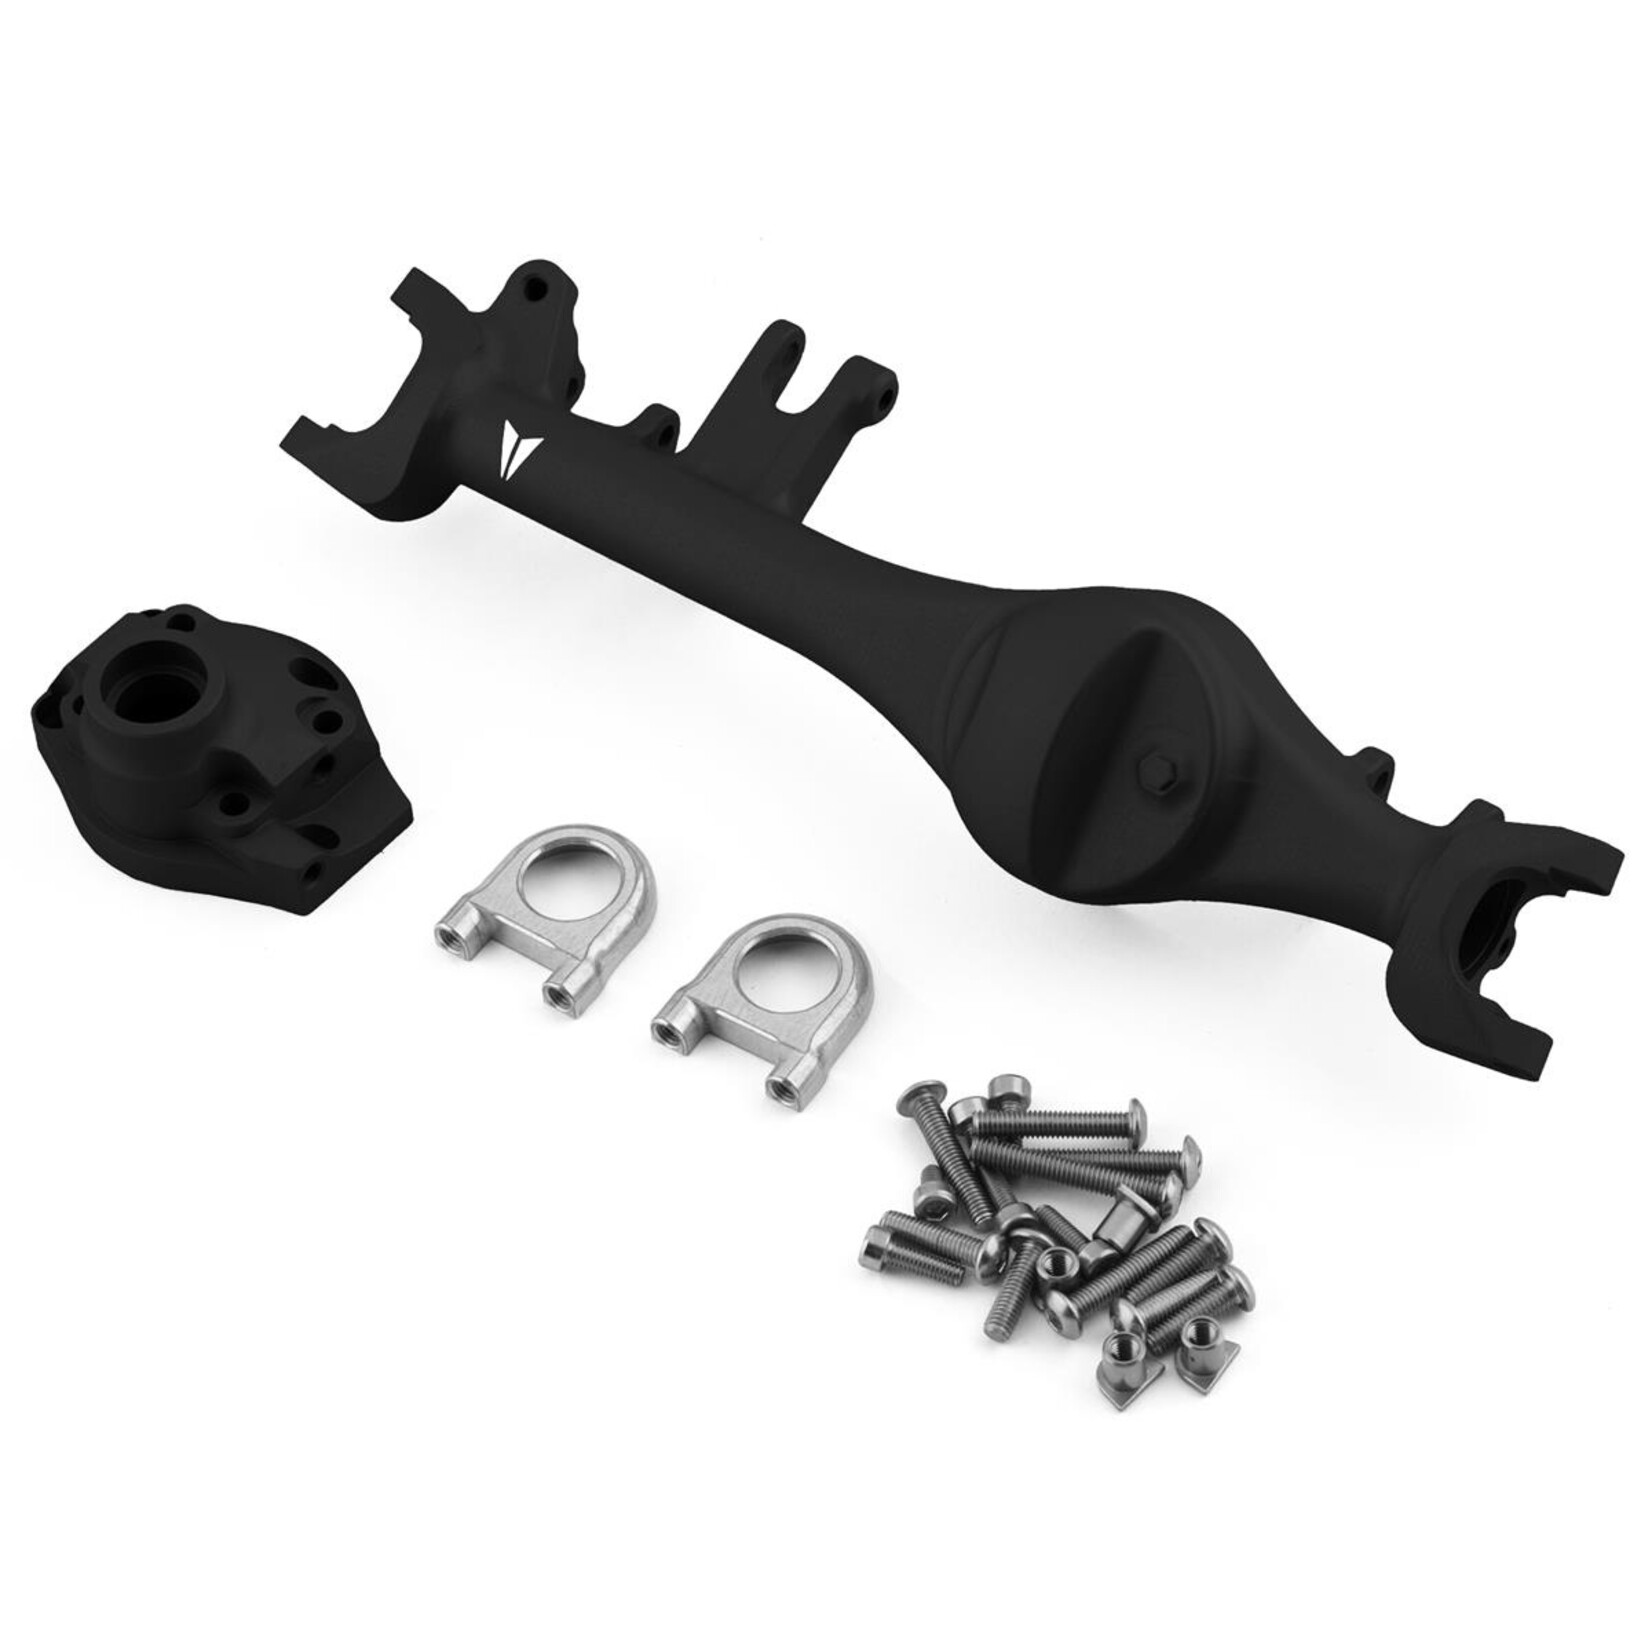 Vanquish Products Vanquish Products F10T Aluminum Front Axle Housing (Black) #VPS08630